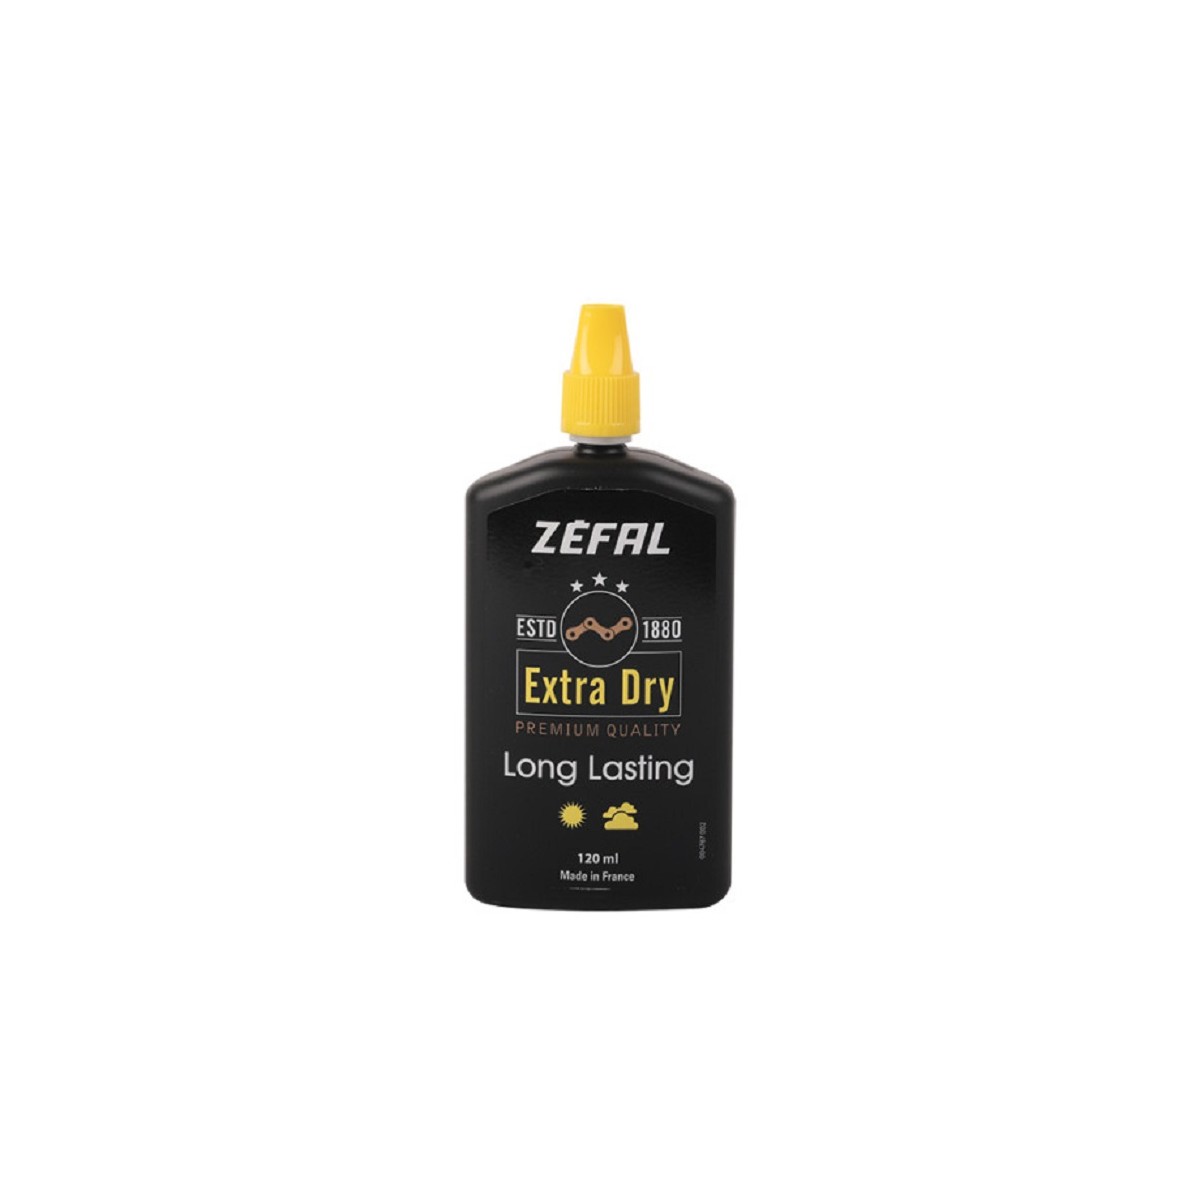 ZEFAL EXTRA DRY chain wax 120ml